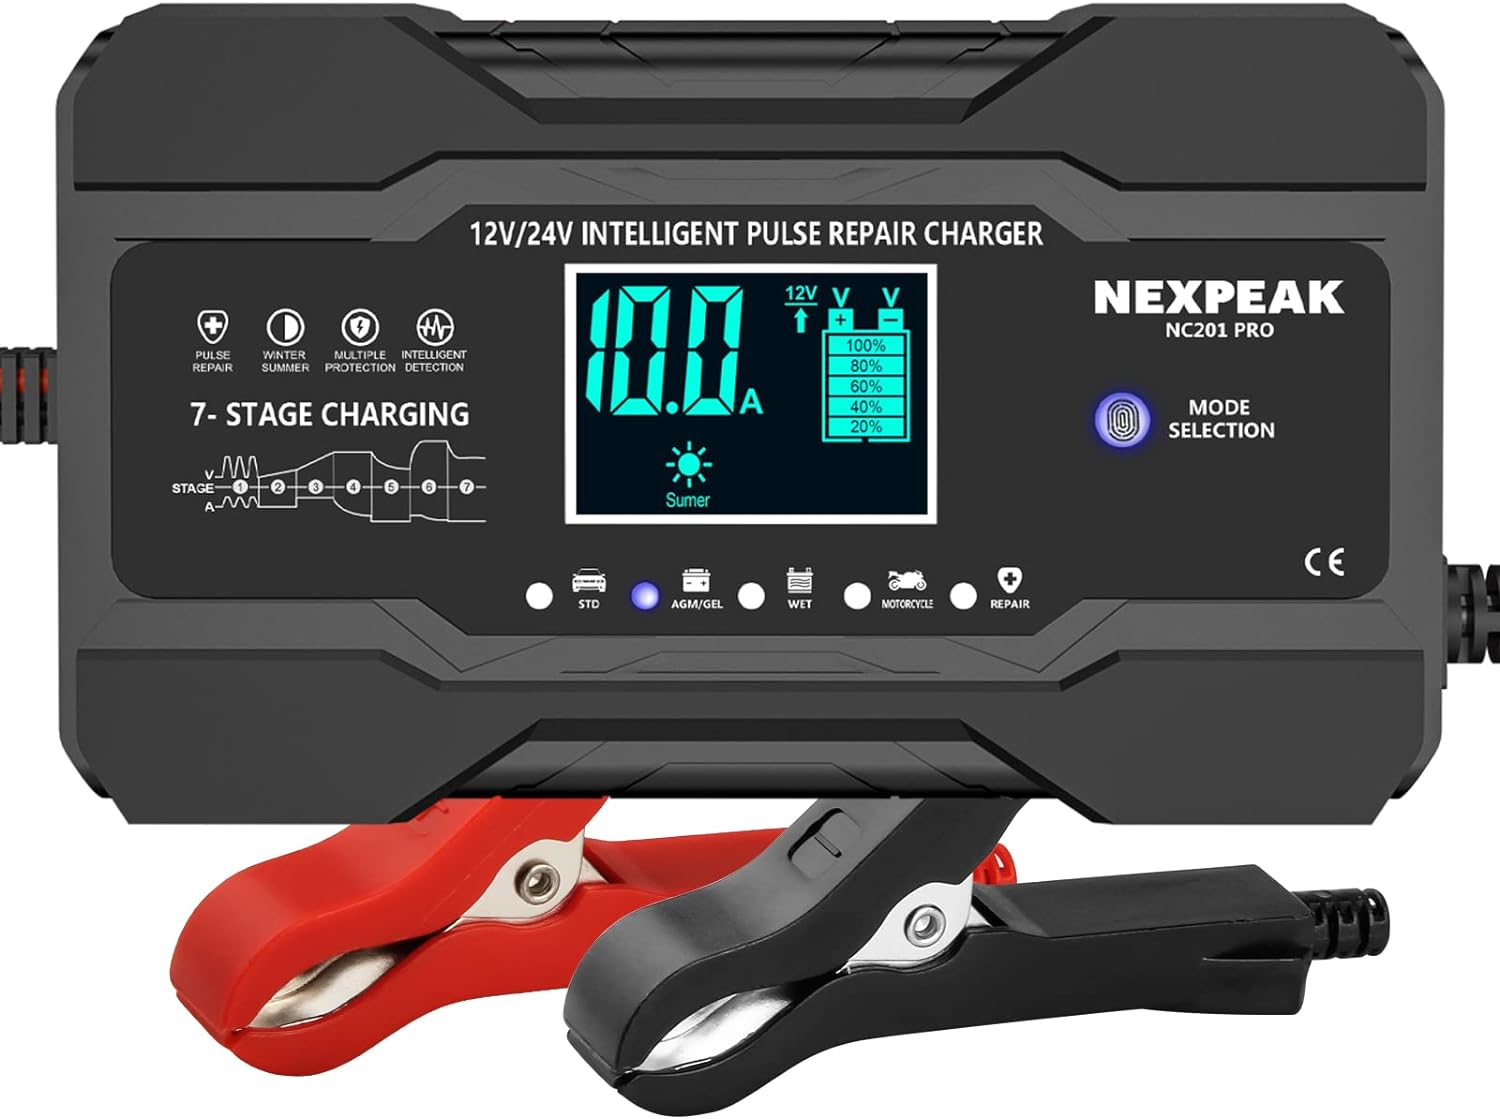 NEXPEAK 10-Amp Car Battery Charger, 12V and 24V Smart Fully Automatic Maintainer Trickle Charger w/Temperature Compensation for Truck Motorcycle Lawn Mower Boat Marine Lead Acid Batteries - NEXPEAK 10-Amp Car Battery Charger Review